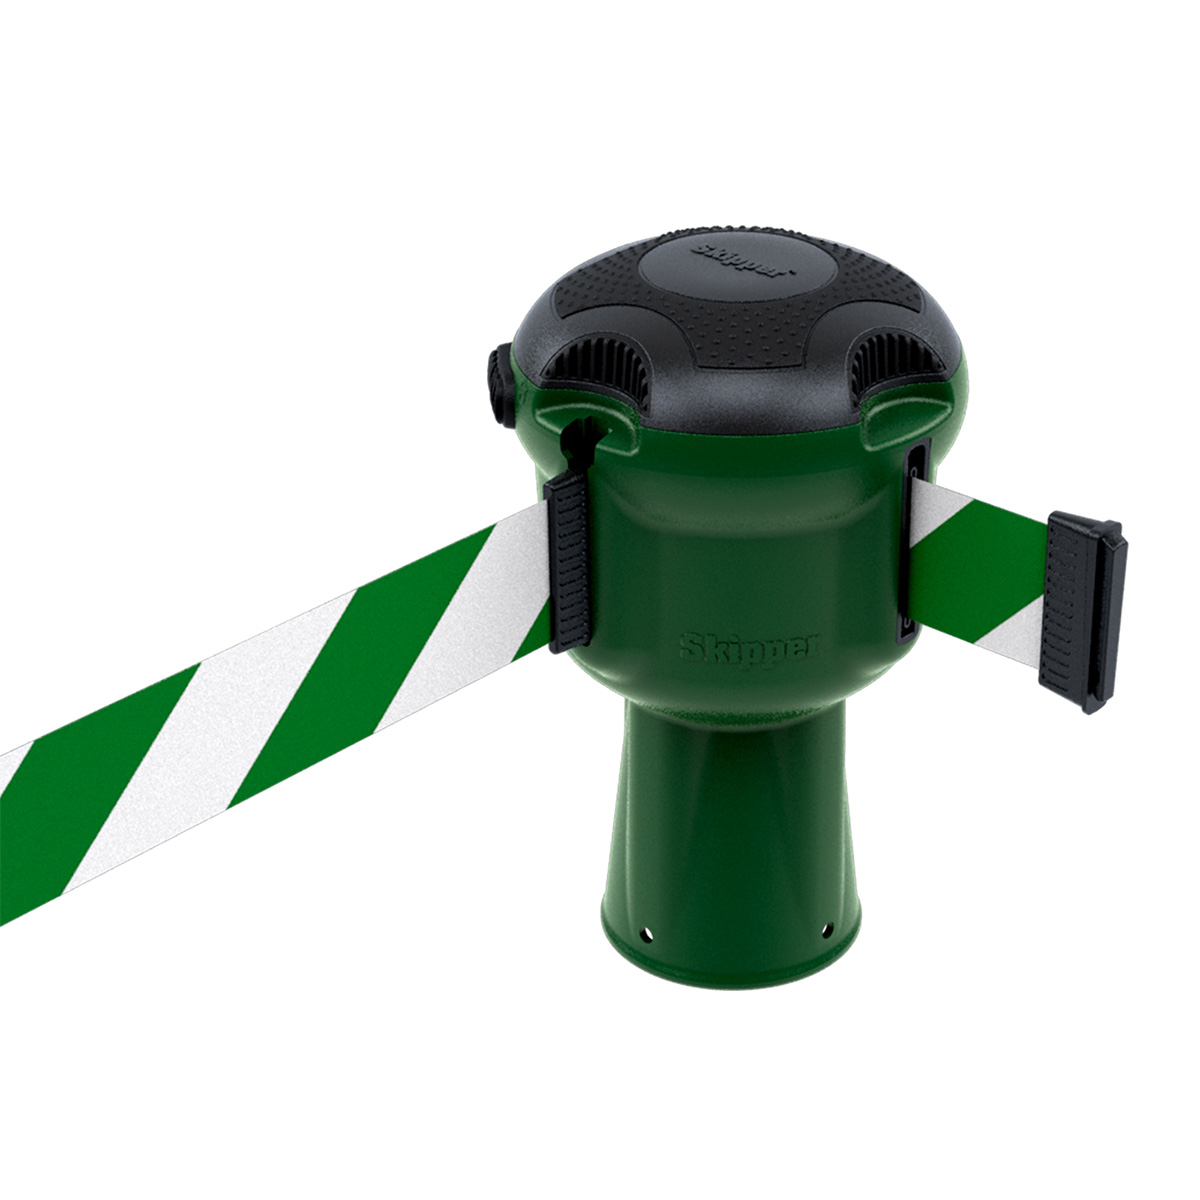 Skipper™ Retractable Safety Barrier in Green - Ideal For Worksites And Warehousing